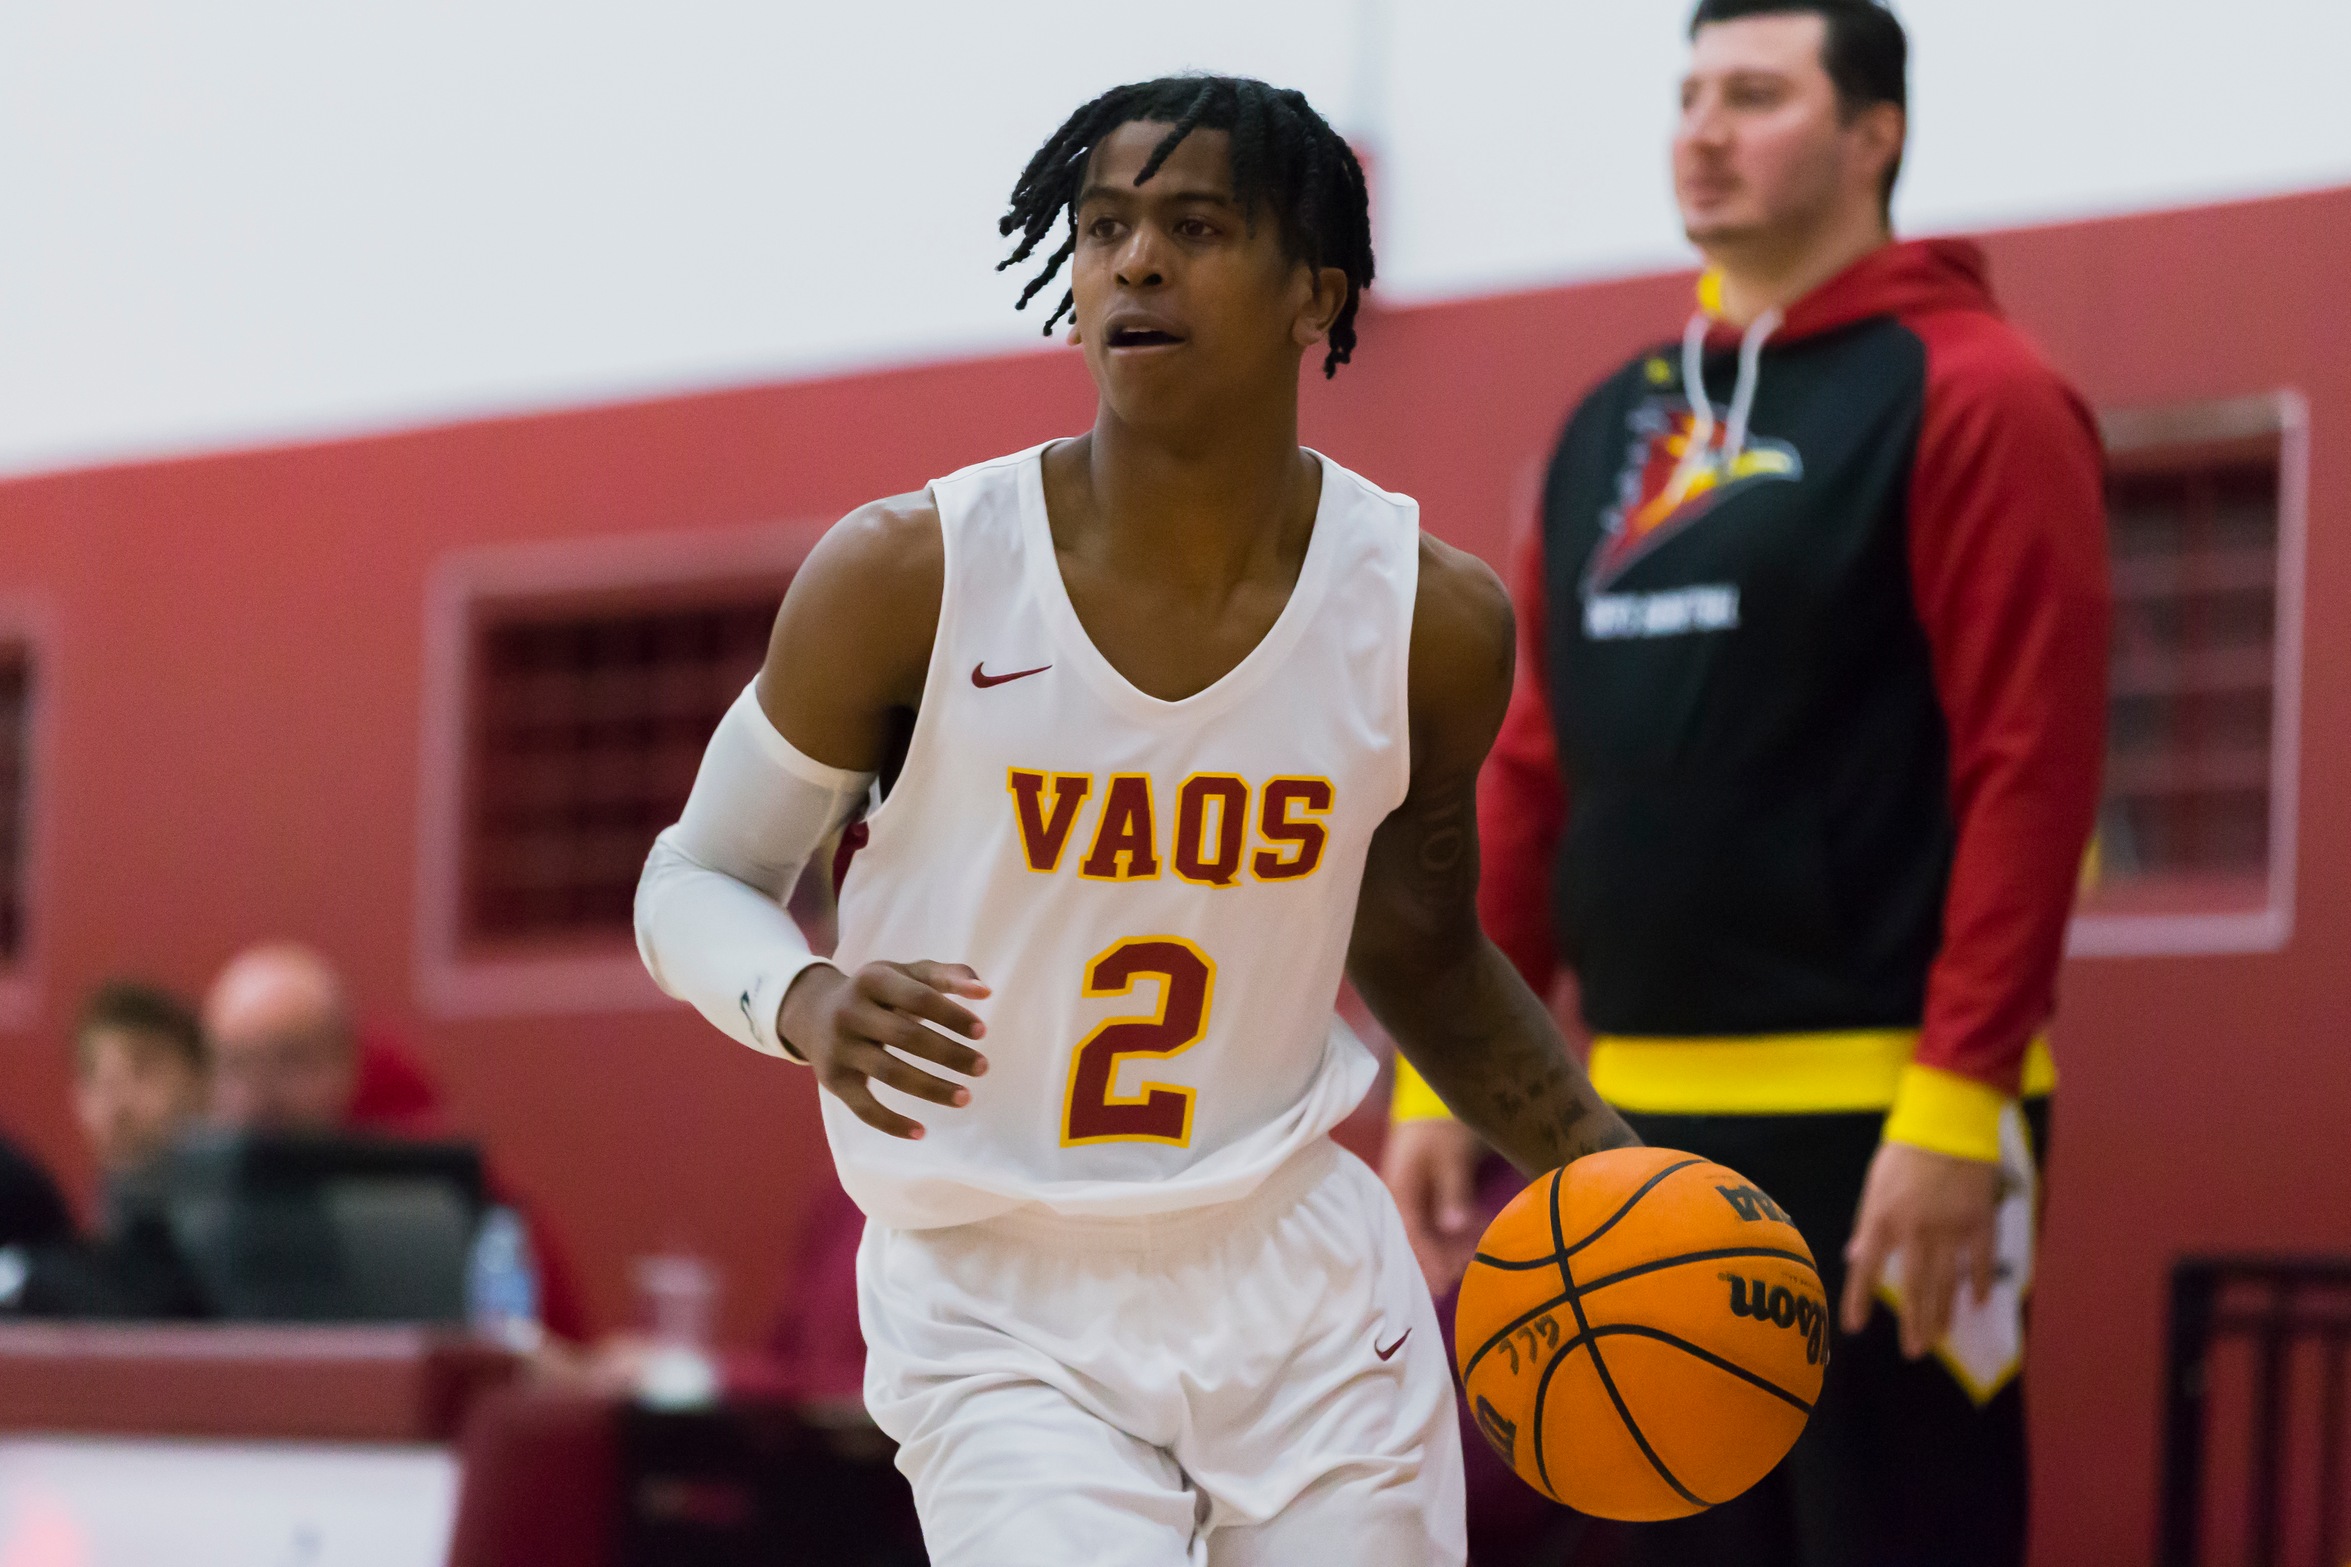 GCC Men's Basketball beats College of the Canyons 71-70 in overtime Jan. 21